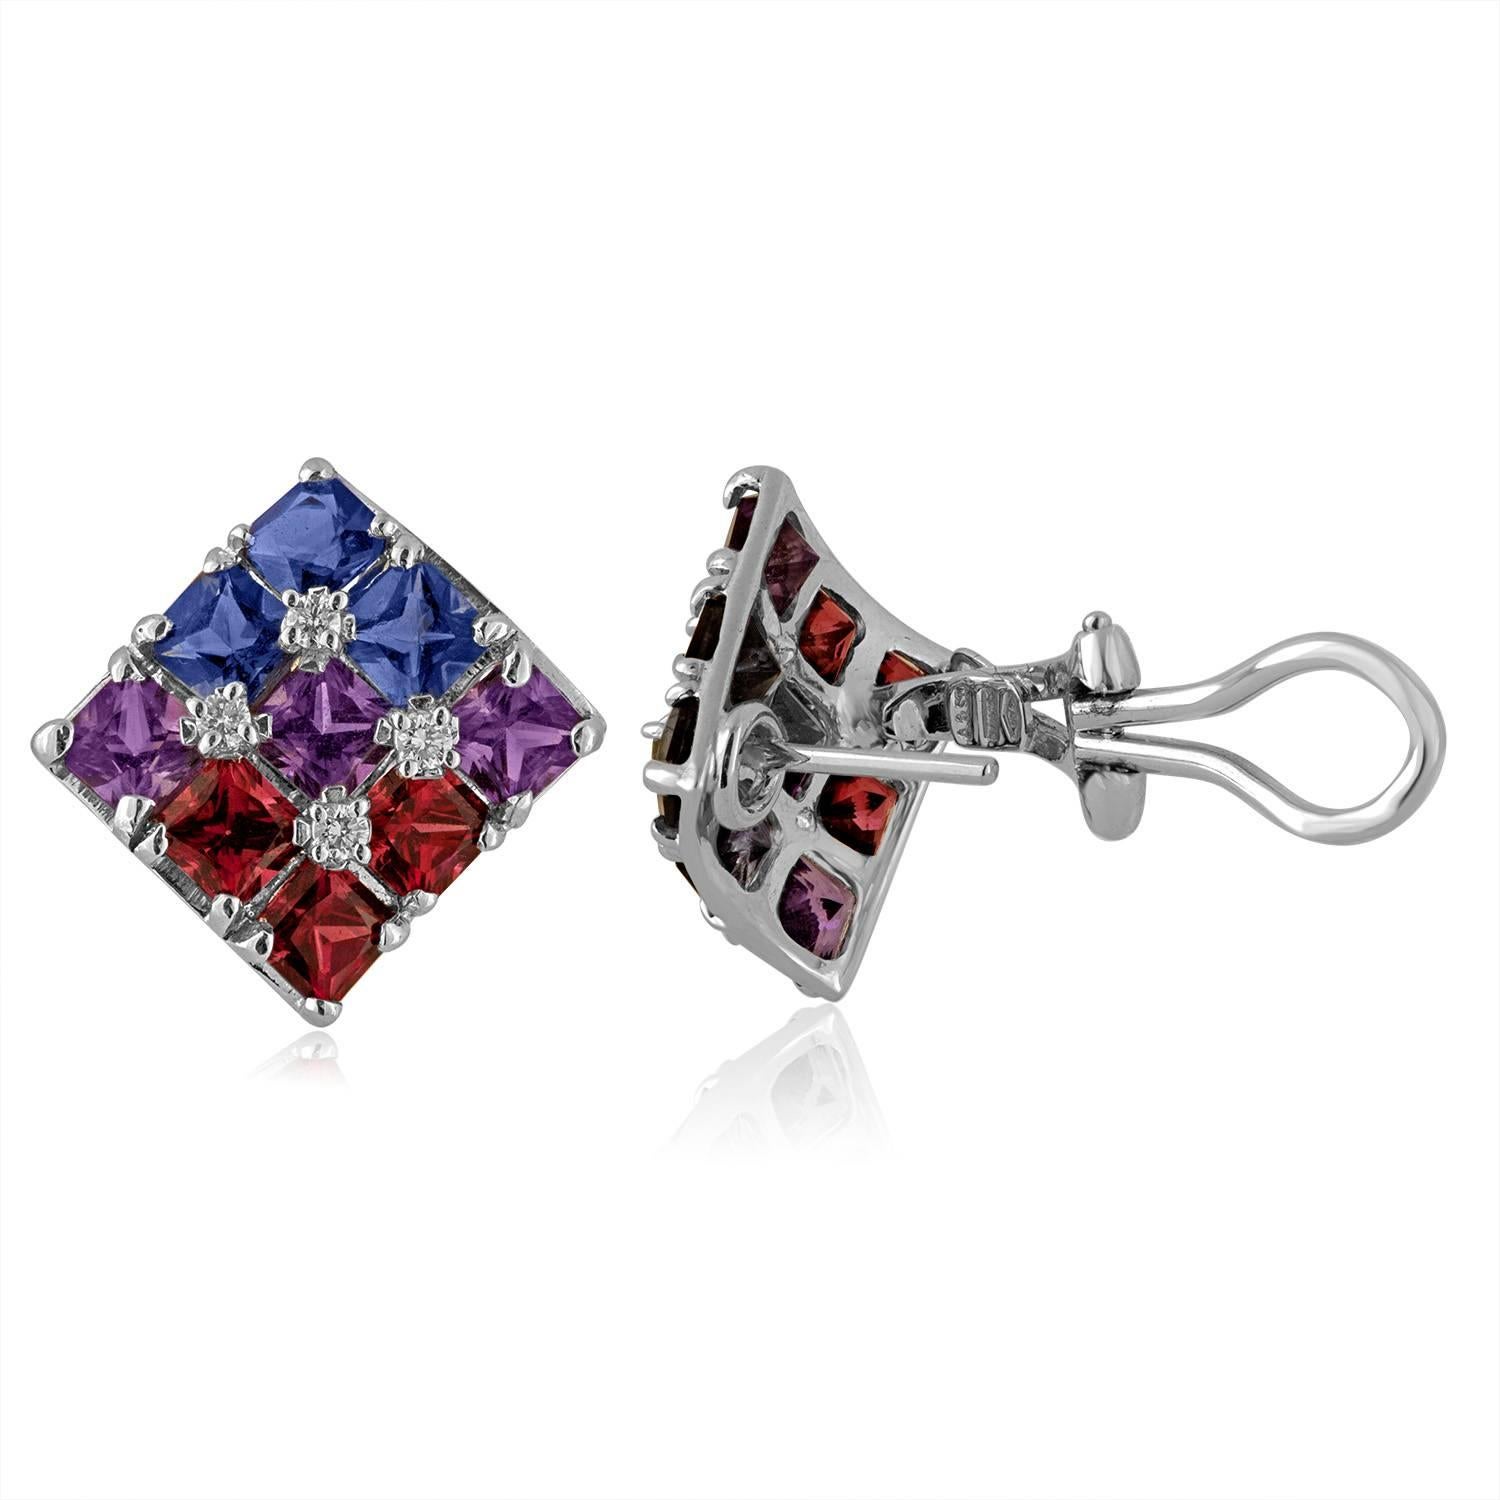 Beautiful Earrings & Ring Set by Alfieri & St. John.
The earrings are 18K White Gold.
There are 0.20 Carats In Diamonds.
There are 1.00 Carats in Garnets.
There are 1.00 Carats in Amethyst.
There are 1.00 Carats in Iolite.
The earrings measure 0.75